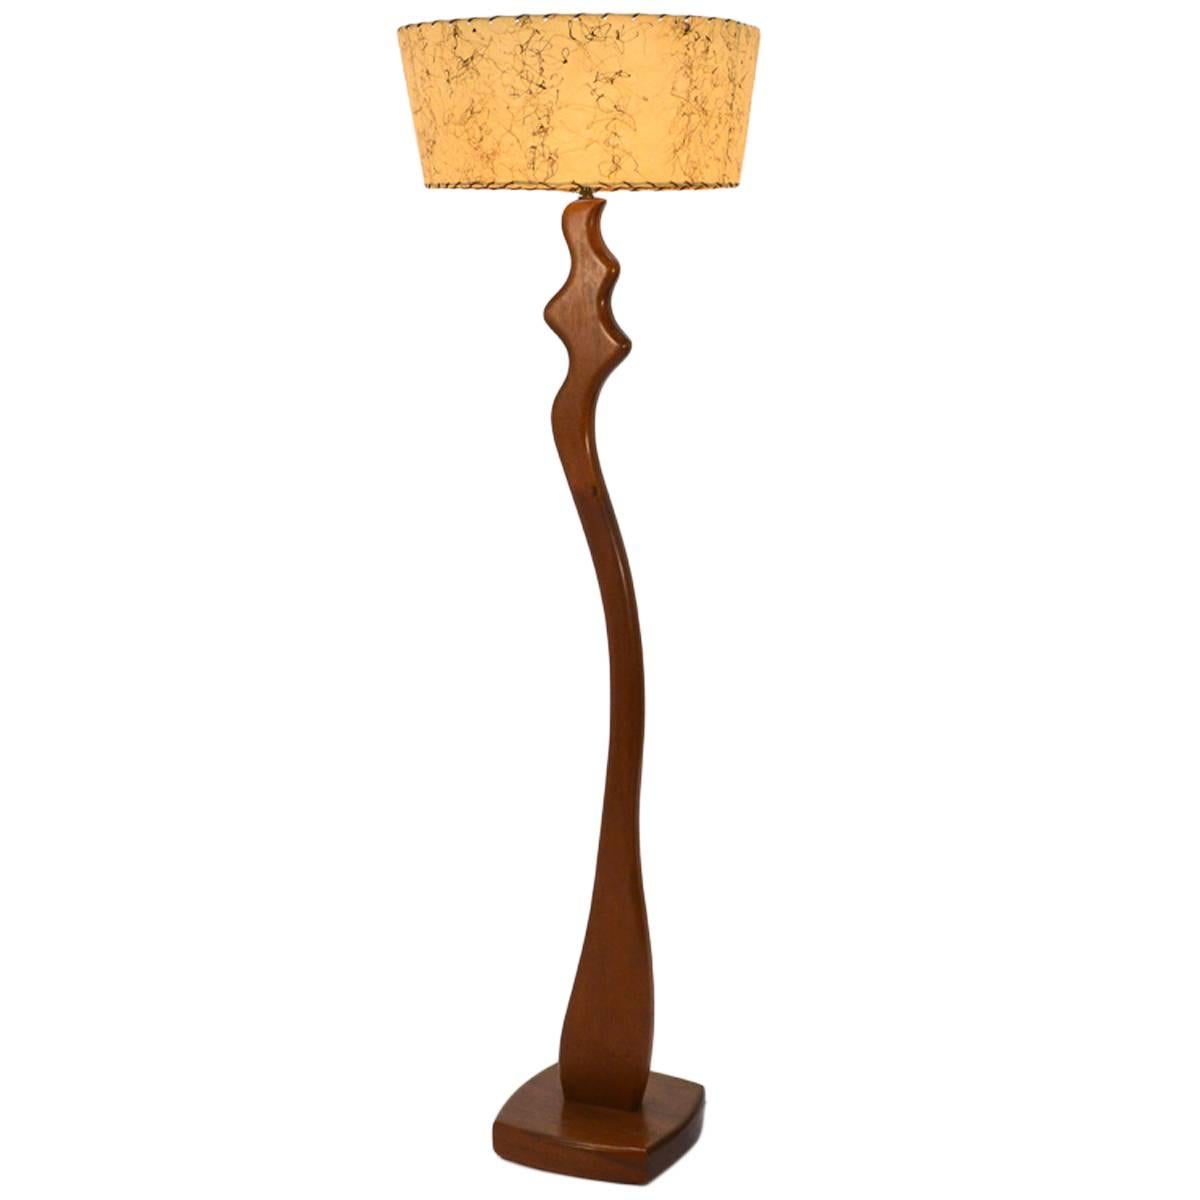 One-of-a-Kind Floor Lamp by Peter Bloch For Sale